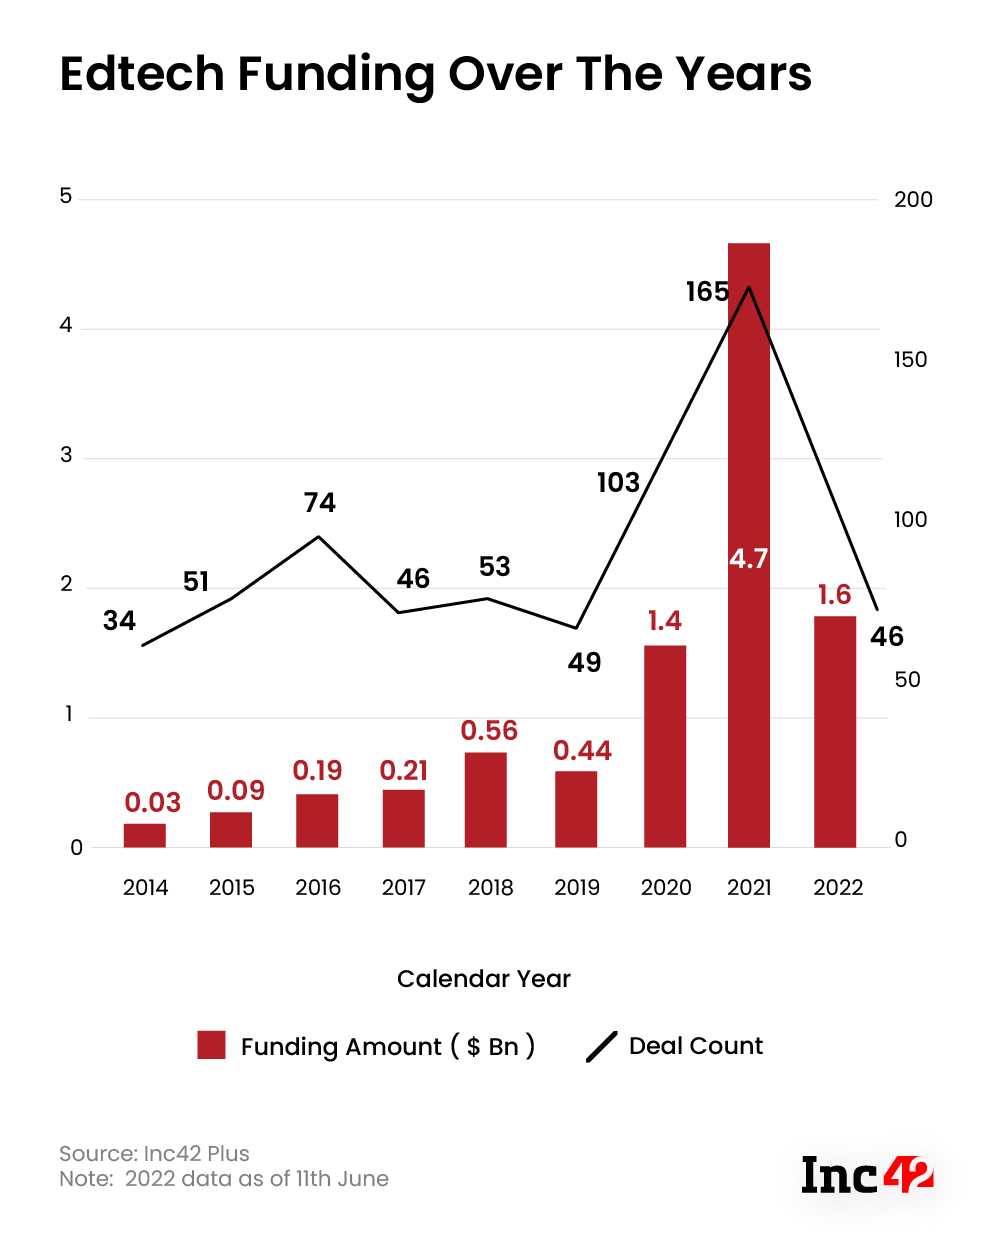 Edtech funding over the years